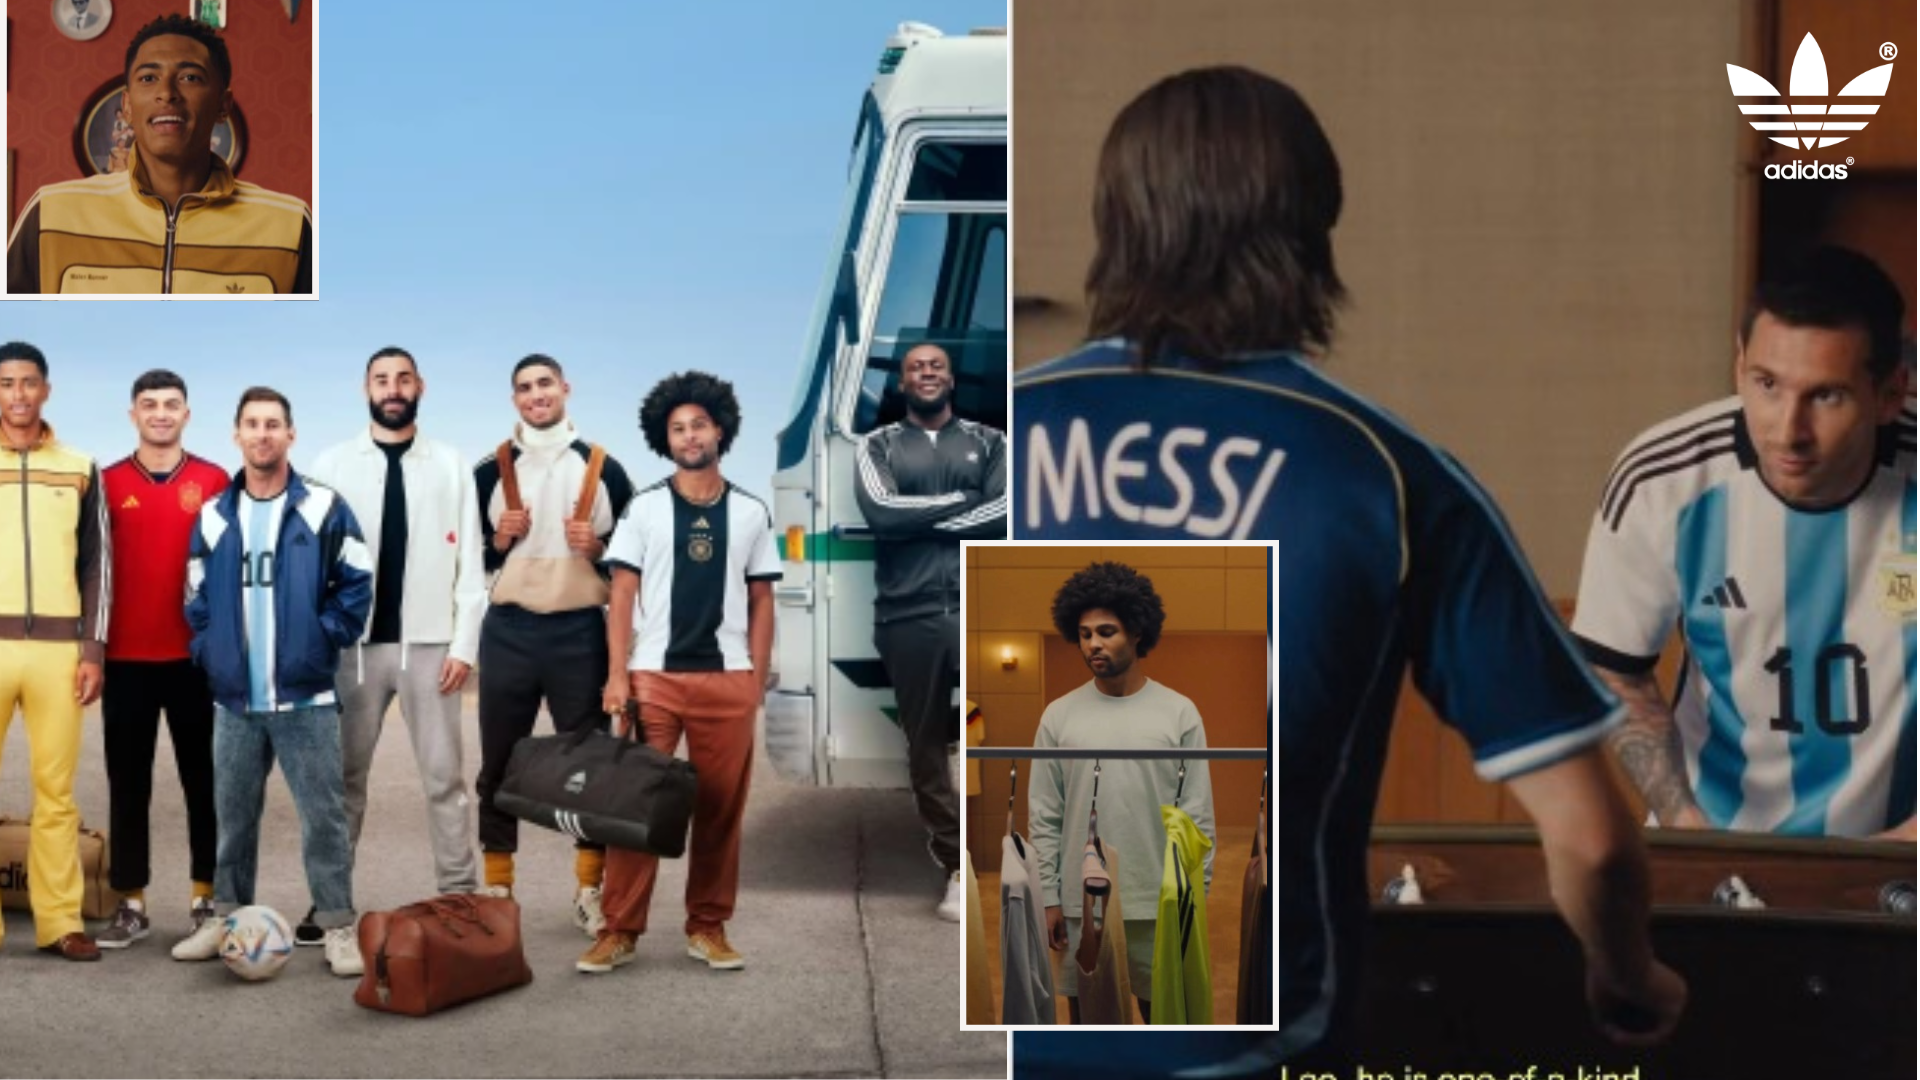 FIFA World Cup: Messi, Benzema, Hakimi and others join Stormzy in  star-studded Adidas advert | Pulse Nigeria